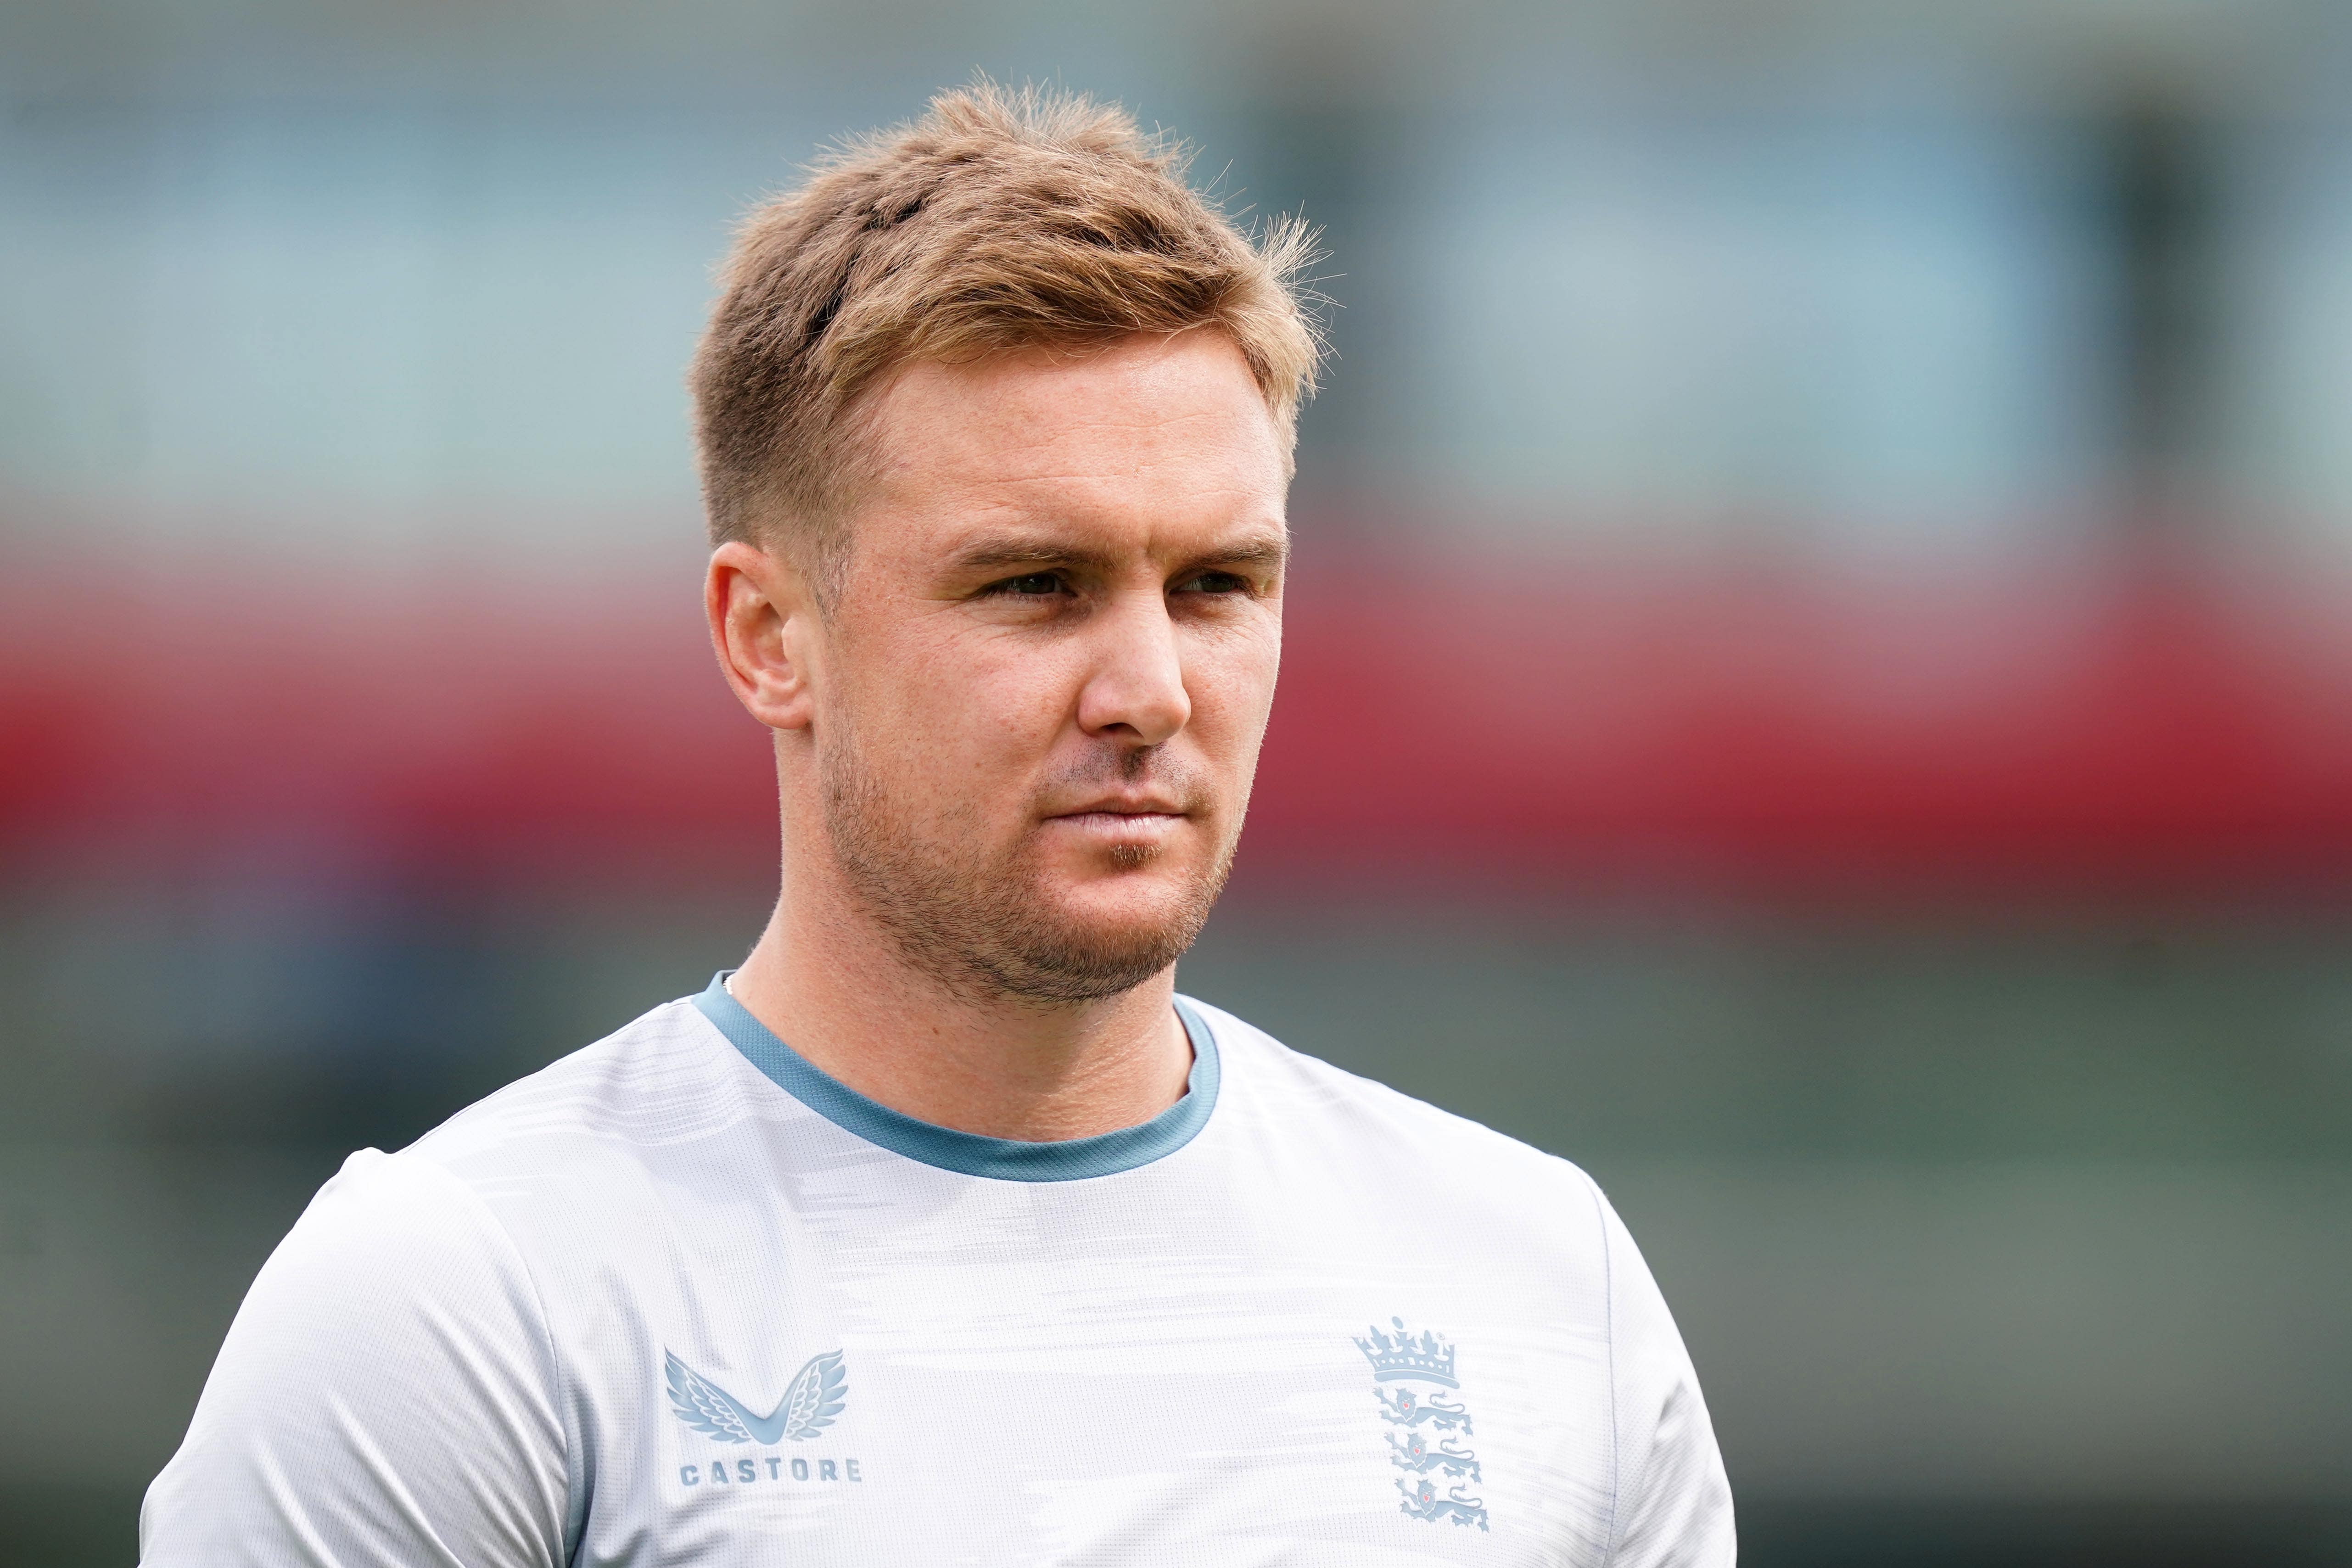 Jason Roy insisted his priority is still on representing England (Mike Egerton/PA)